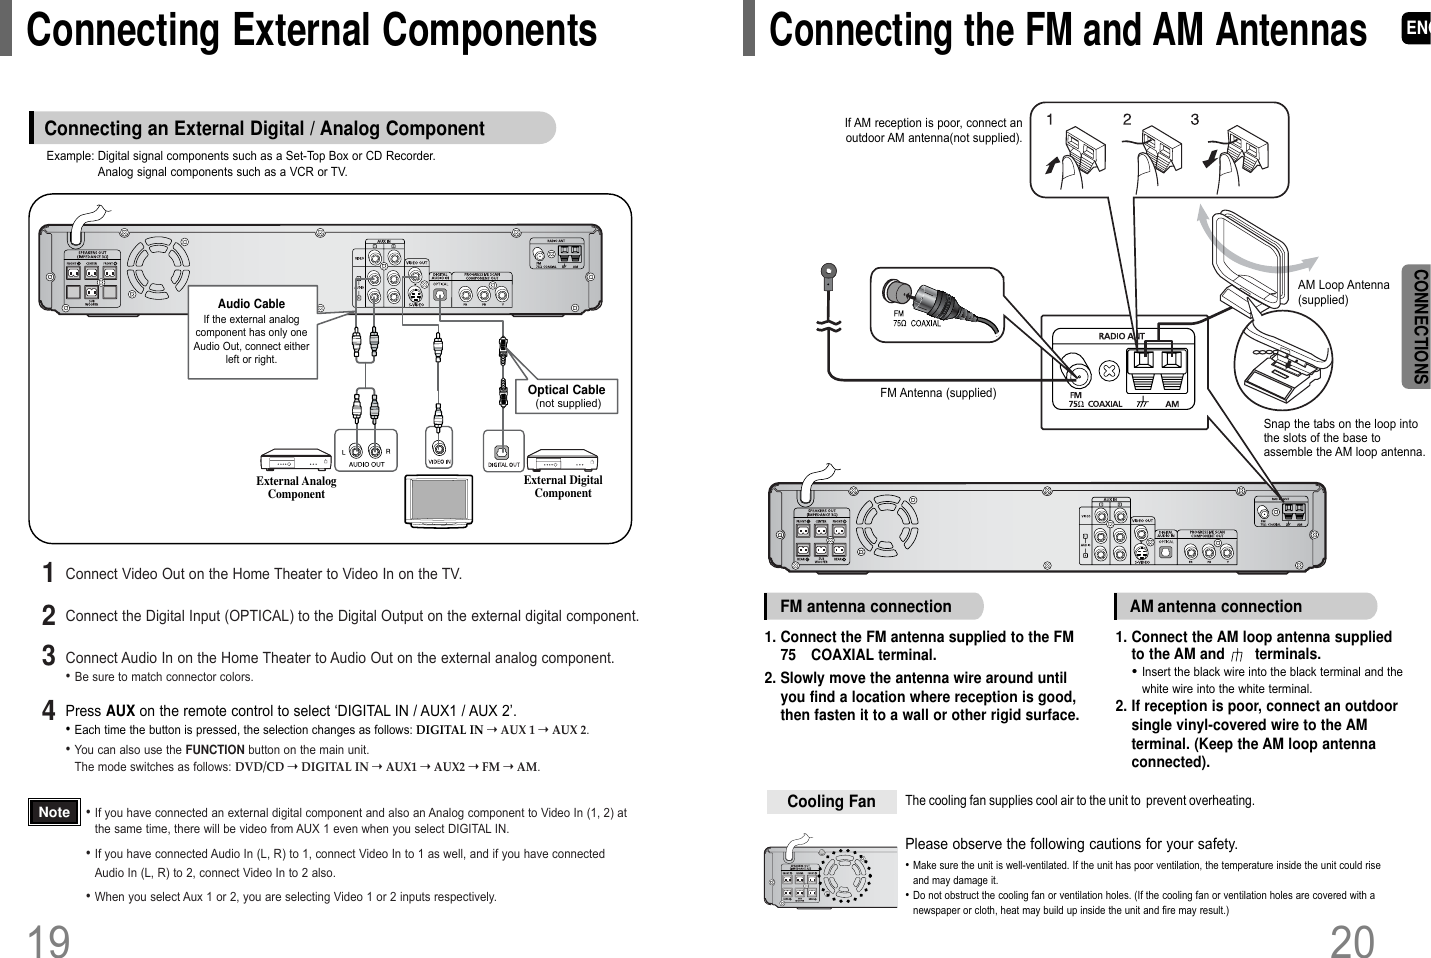 ENG2019CONNECTIONSConnecting External ComponentsConnecting the FM and AM AntennasThe cooling fan supplies cool air to the unit to  prevent overheating.Please observe the following cautions for your safety.•Make sure the unit is well-ventilated. If the unit has poor ventilation, the temperature inside the unit could riseand may damage it.•Do not obstruct the cooling fan or ventilation holes. (If the cooling fan or ventilation holes are covered with anewspaper or cloth, heat may build up inside the unit and fire may result.)Cooling FanFM antenna connection AM antenna connection1. Connect the FM antenna supplied to the FM75COAXIAL terminal.2. Slowly move the antenna wire around untilyou find a location where reception is good,then fasten it to a wall or other rigid surface.1. Connect the AM loop antenna suppliedto the AM and       terminals.•Insert the black wire into the black terminal and thewhite wire into the white terminal.2. If reception is poor, connect an outdoorsingle vinyl-covered wire to the AM terminal. (Keep the AM loop antennaconnected).Snap the tabs on the loop intothe slots of the base toassemble the AM loop antenna.FM Antenna (supplied)AM Loop Antenna (supplied)If AM reception is poor, connect anoutdoor AM antenna(not supplied).Example: Digital signal components such as a Set-Top Box or CD Recorder.Analog signal components such as a VCR or TV.Connecting an External Digital / Analog ComponentOptical Cable(not supplied)Audio CableIf the external analogcomponent has only oneAudio Out, connect eitherleft or right.External DigitalComponentExternal AnalogComponentPress AUX on the remote control to select ‘DIGITAL IN / AUX1 / AUX 2’.•Each time the button is pressed, the selection changes as follows: DIGITAL IN ➝AUX 1 ➝AUX 2.•You can also use the FUNCTION button on the main unit.The mode switches as follows: DVD/CD ➝DIGITAL IN ➝AUX1 ➝AUX2 ➝FM ➝AM.Connect the Digital Input (OPTICAL) to the Digital Output on the external digital component.2Connect Video Out on the Home Theater to Video In on the TV.14Connect Audio In on the Home Theater to Audio Out on the external analog component.•Be sure to match connector colors.3•If you have connected an external digital component and also an Analog component to Video In (1, 2) atthe same time, there will be video from AUX 1 even when you select DIGITAL IN.    •If you have connected Audio In (L, R) to 1, connect Video In to 1 as well, and if you have connectedAudio In (L, R) to 2, connect Video In to 2 also.•When you select Aux 1 or 2, you are selecting Video 1 or 2 inputs respectively.Note